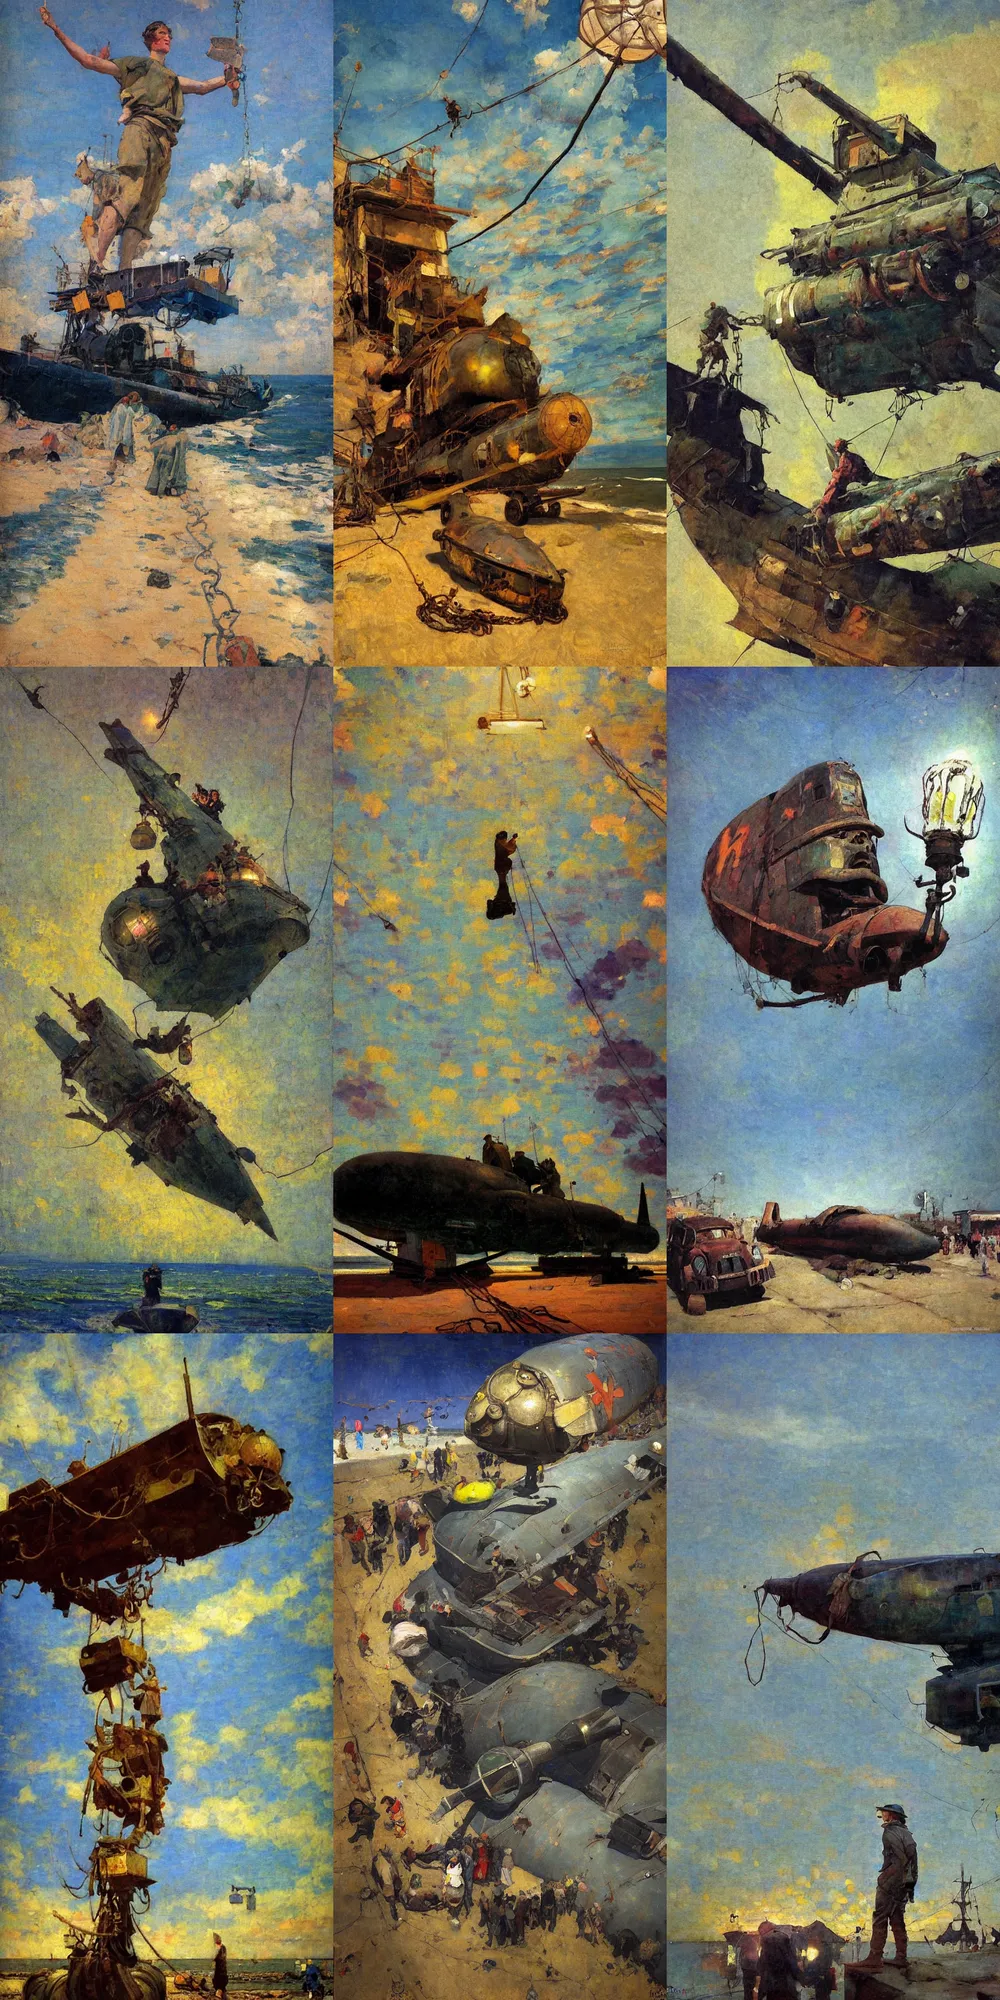 Prompt: looking up, painting by dean cornwell, ilya repin, nc wyeth painting, ultra wide, vanishing point, 3 d perspective, beached submarine, award winning, up close, climbing, beaching, rust, midnight, junk town, lanterns, makeshift house, colorful lightbulb festoon lights, telephone pole